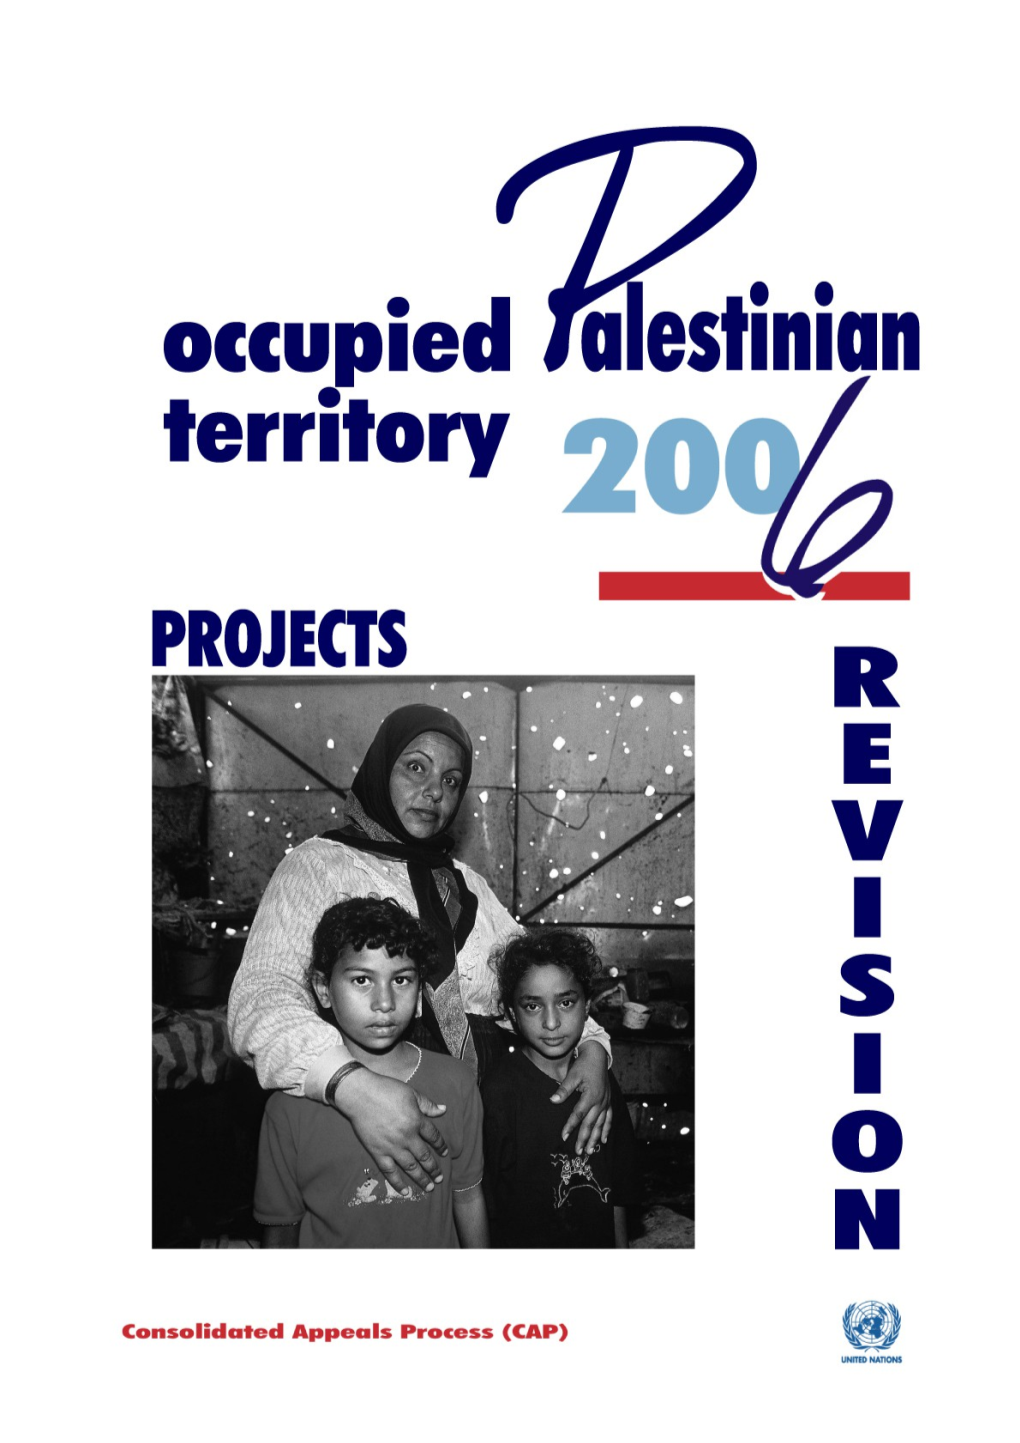 Revision of the Consolidated Appeal for Occupied Palestinian Territory 2006 - Projects (Word)